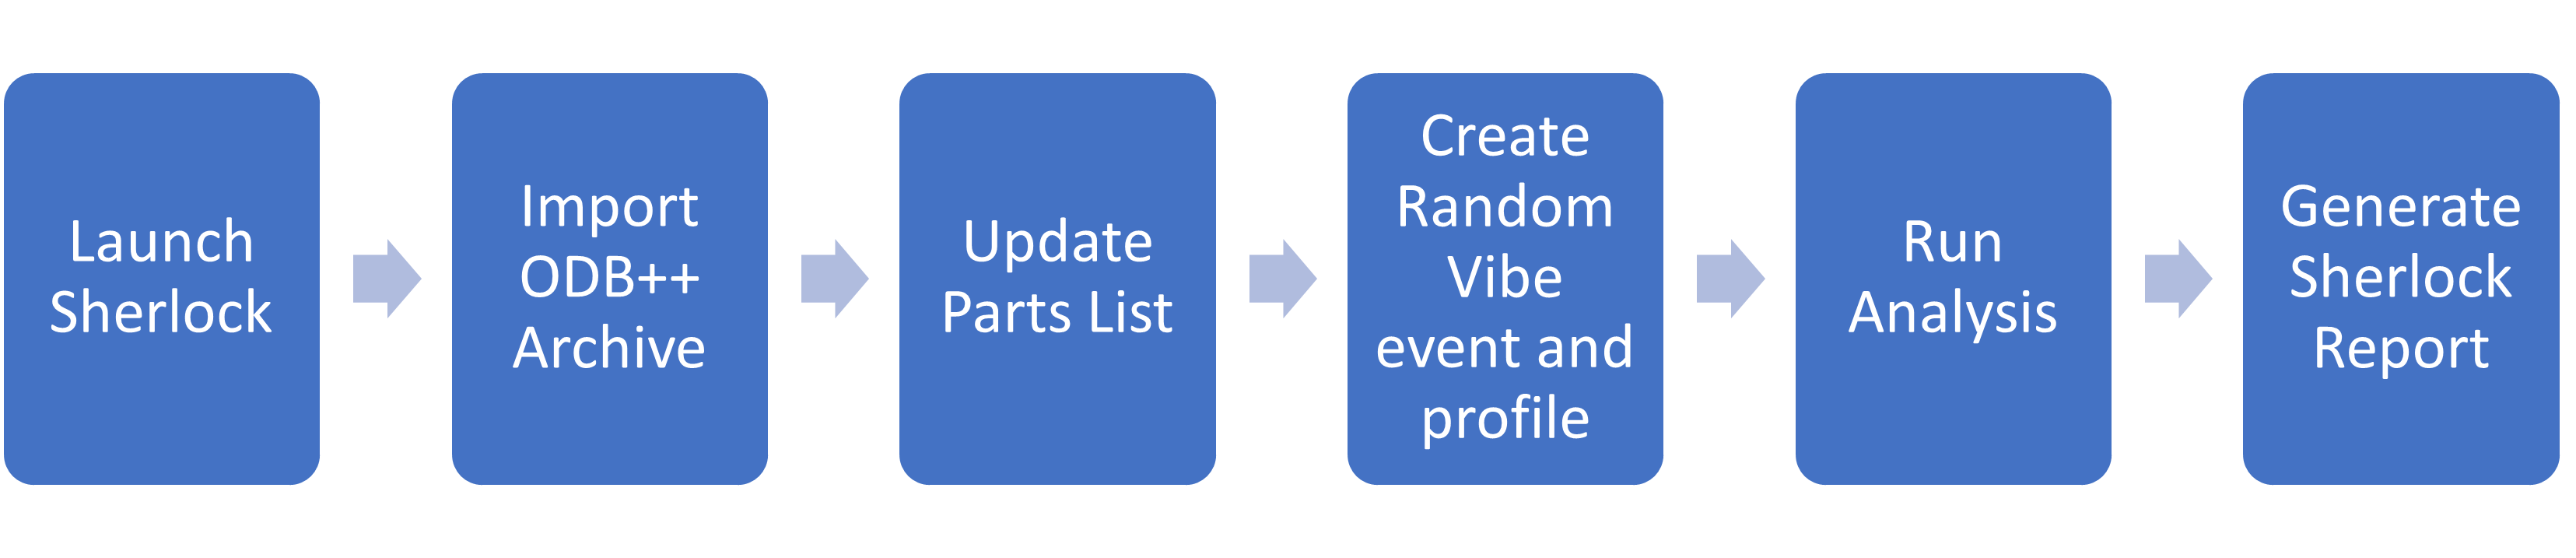 User guide example workflow